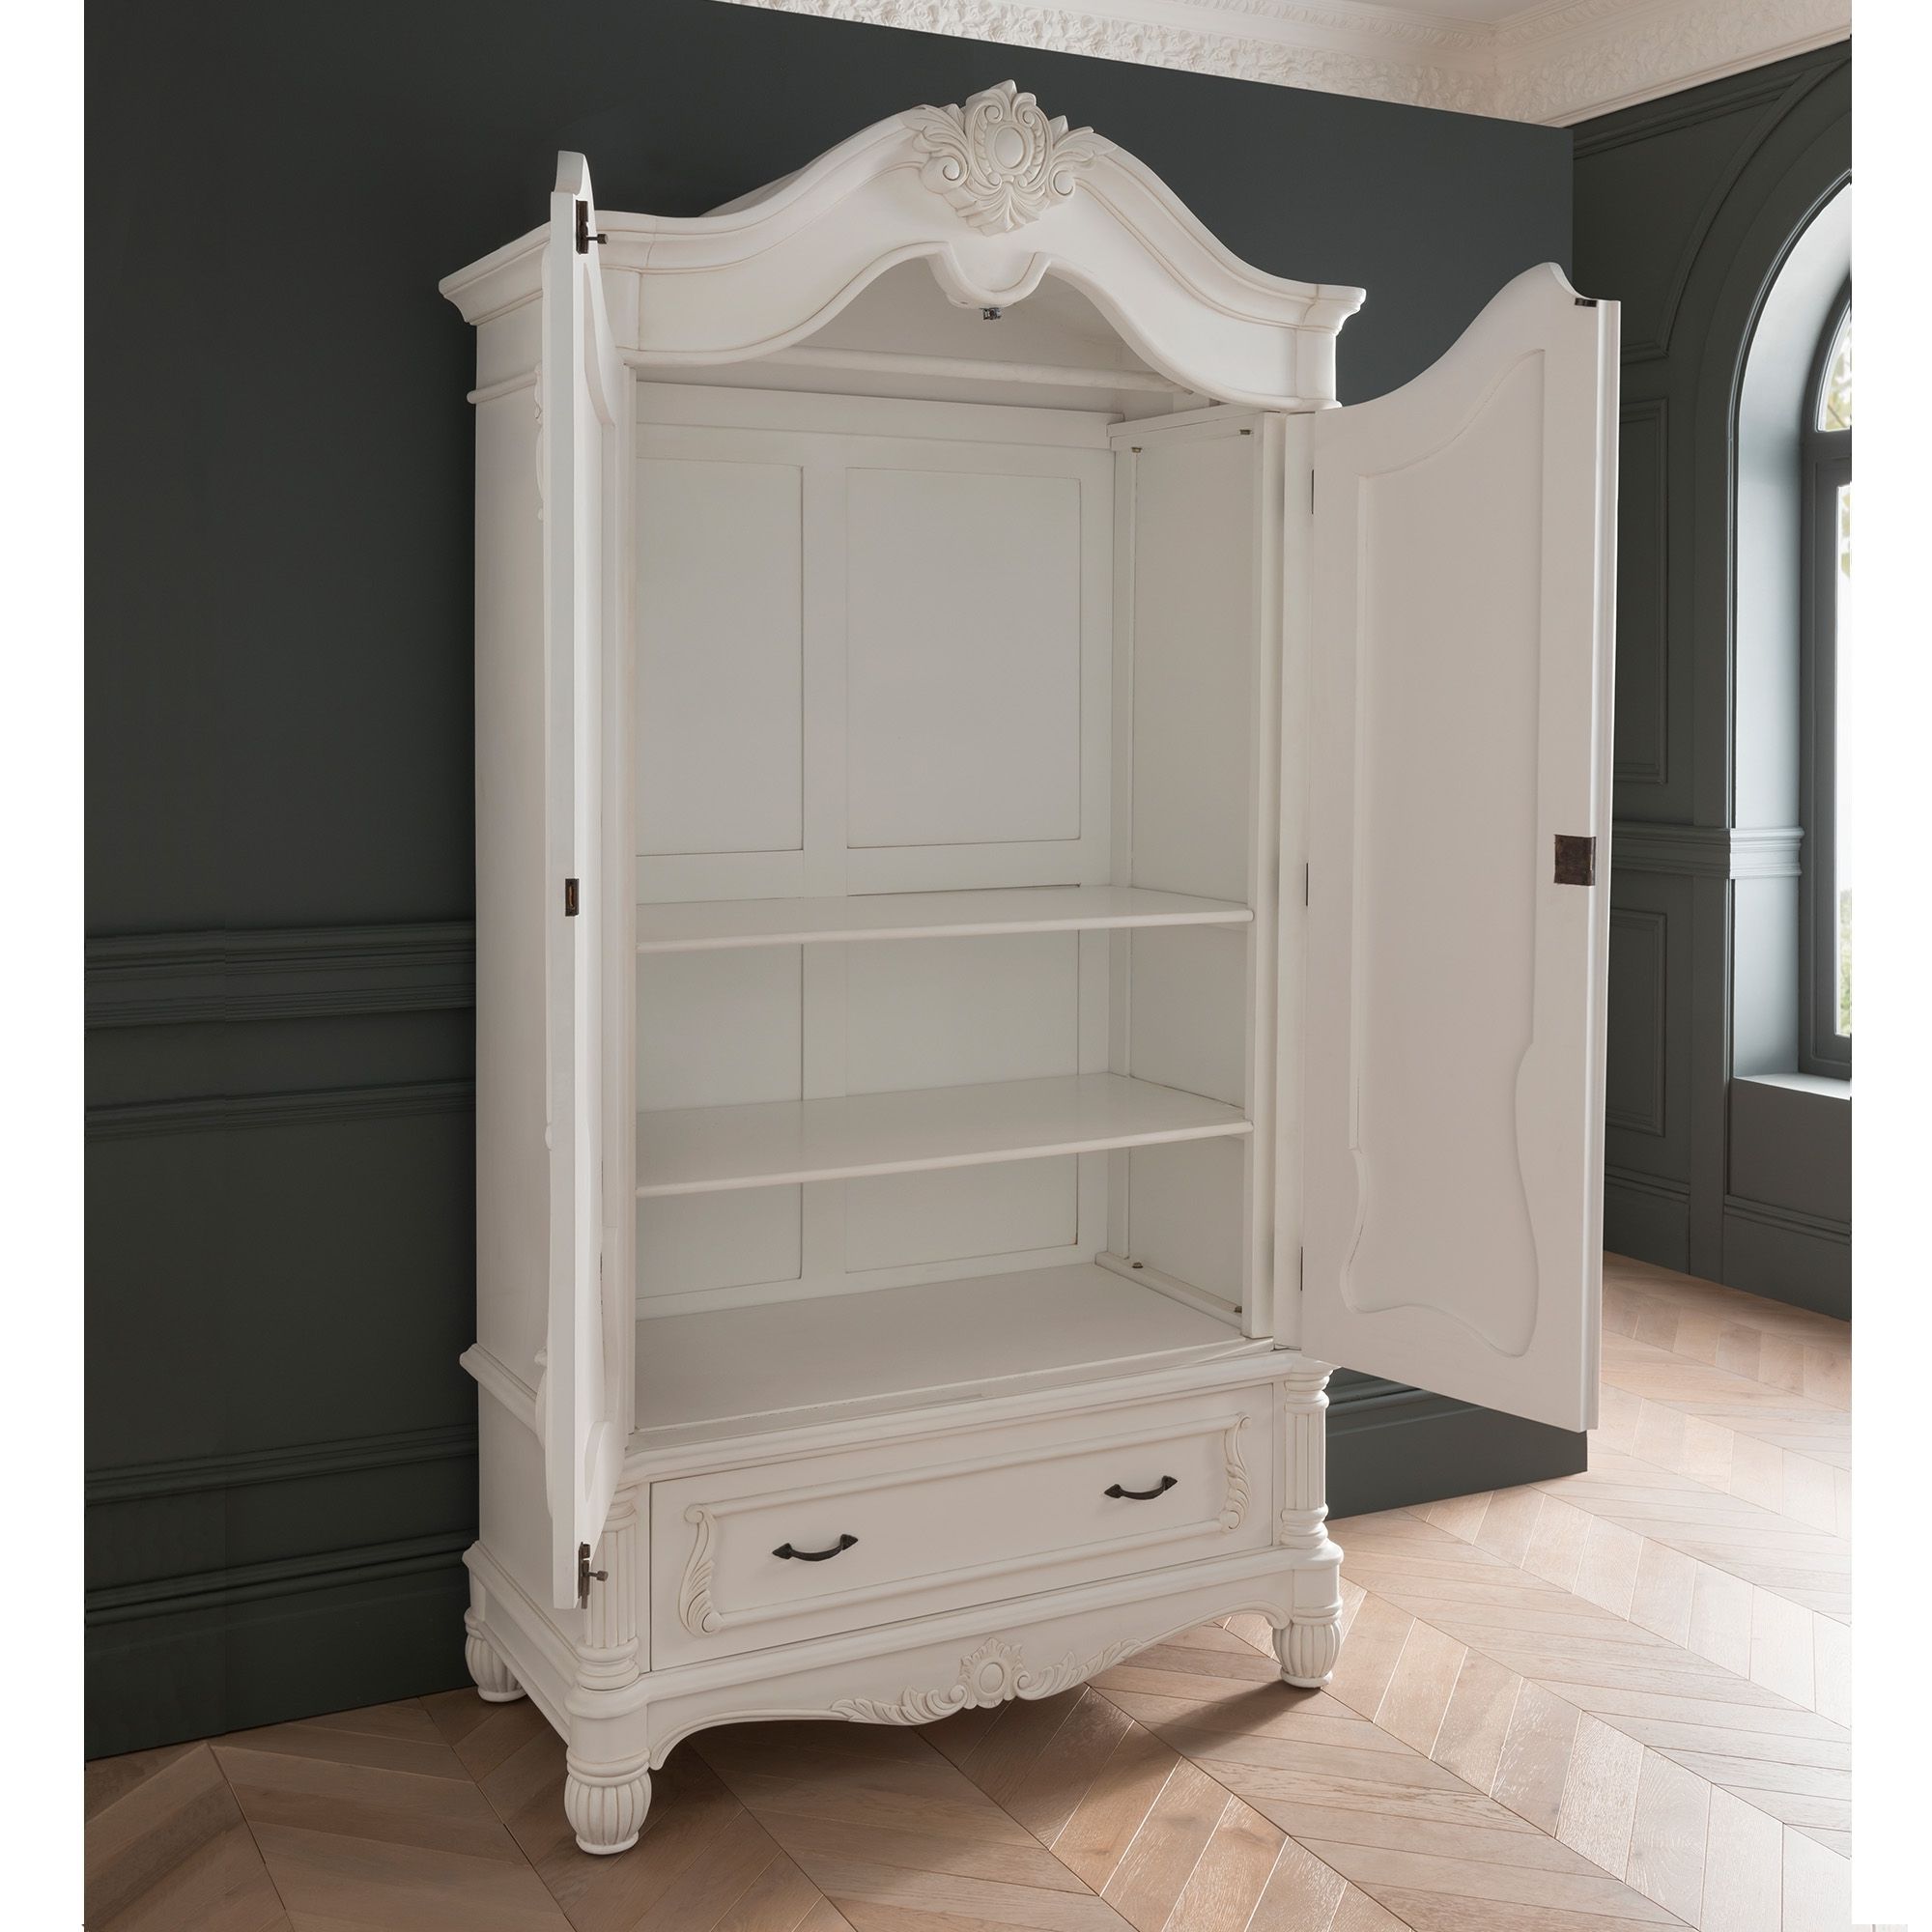 Antique French Style White Finished 1 Drawer Wardrobe | Homesdirect365 Within White Antique Wardrobes (Gallery 16 of 20)